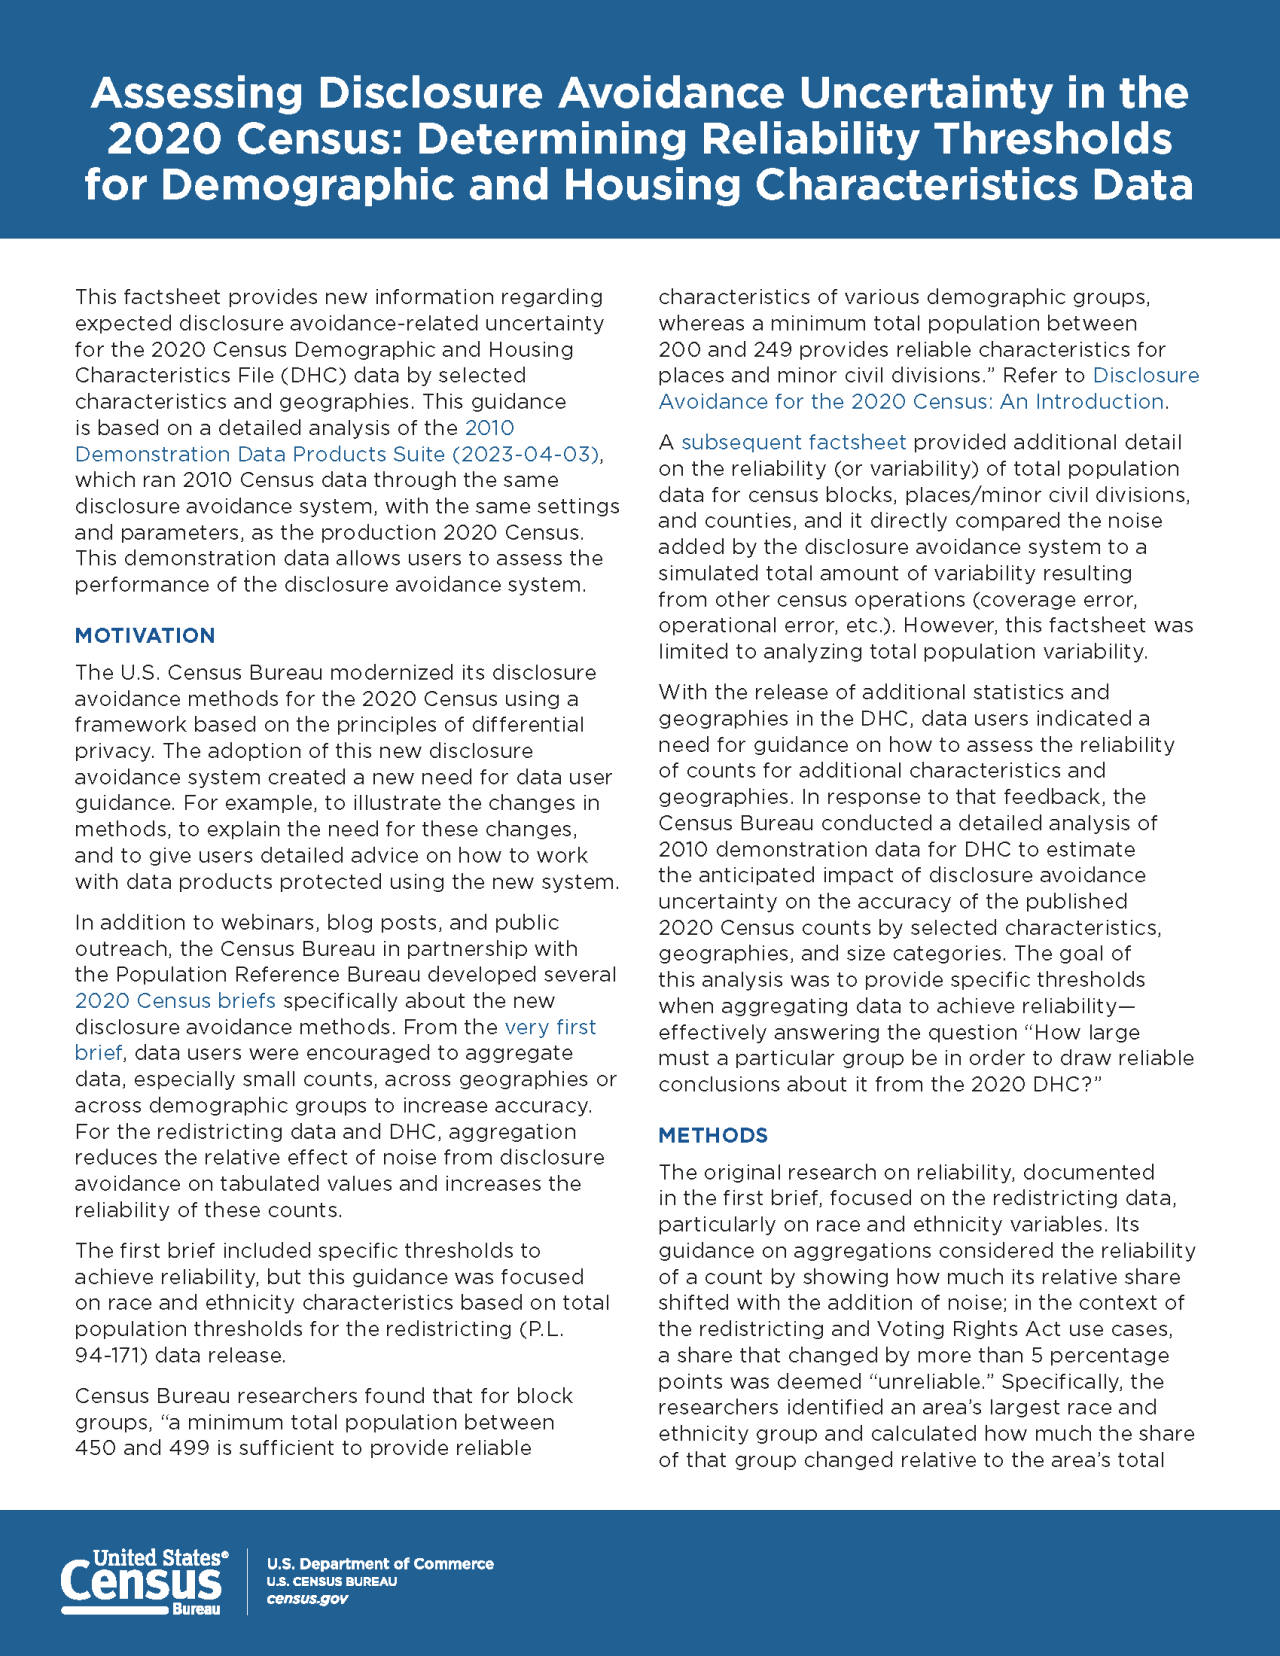 Factsheet of Assessing Disclosure Avoidance Uncertainty in the 2020 Census: Determining Reliability Thresholds for Demographic and Housing Characteristics Data